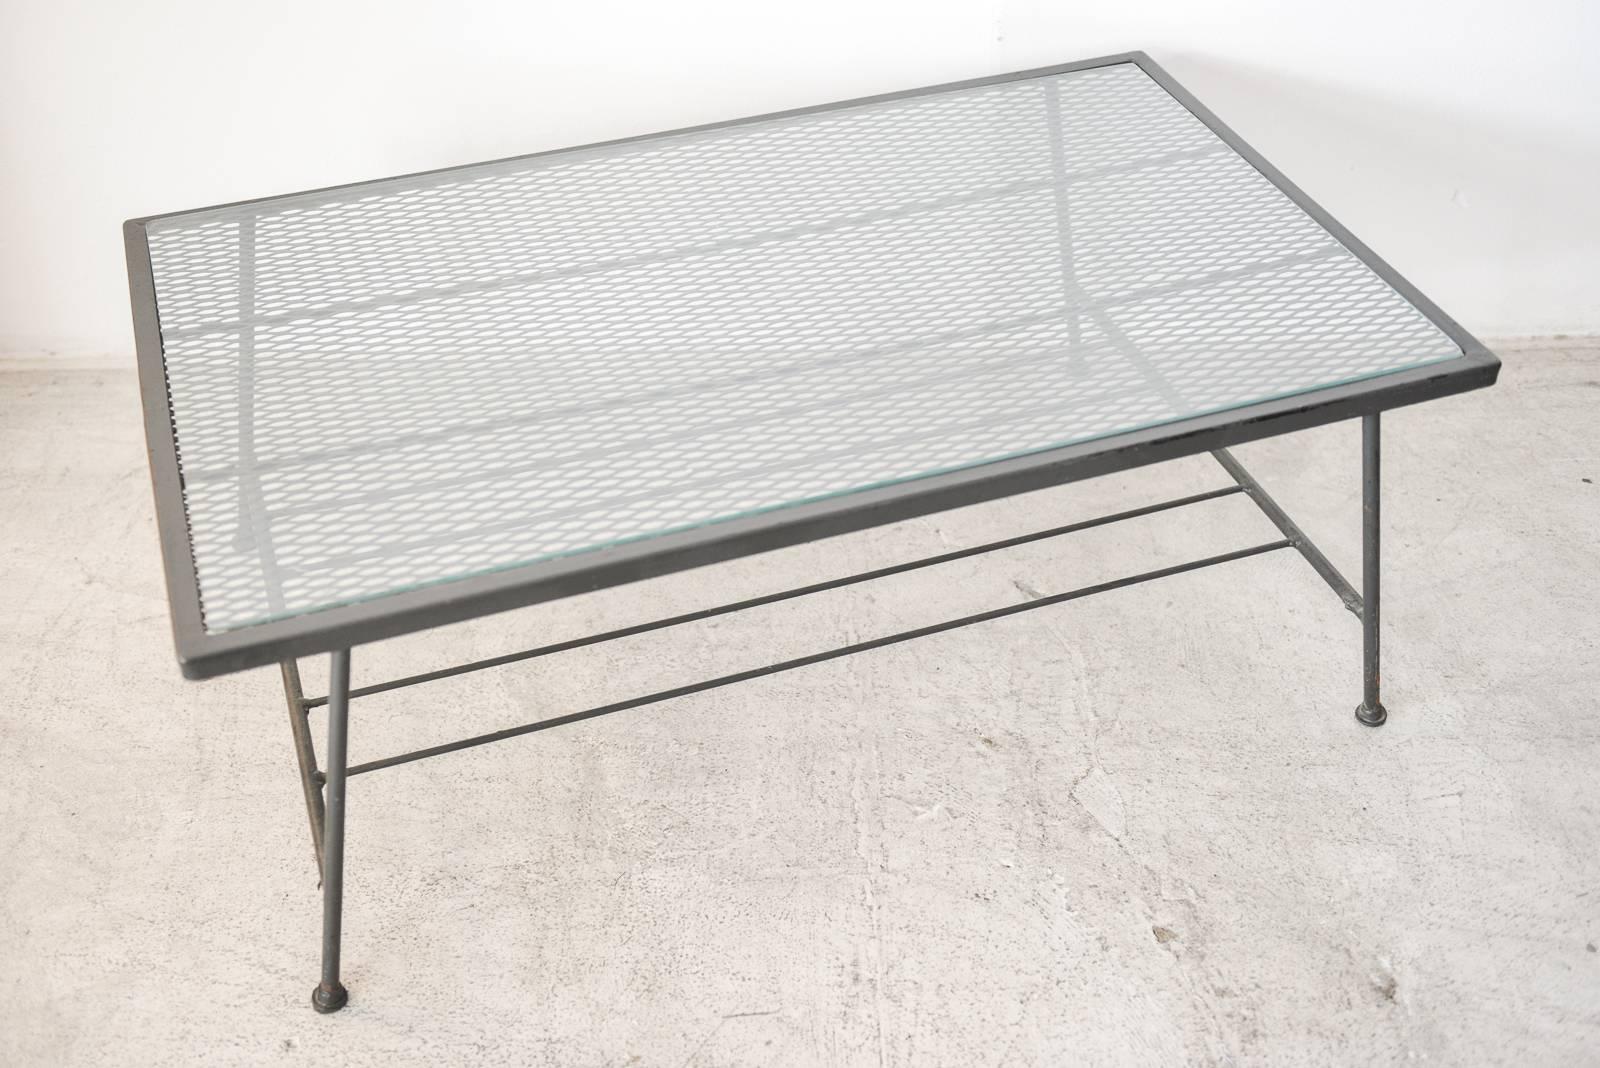 Mid-Century Modern Iron and Glass Coffee Table by Inco Company of California, circa 1955